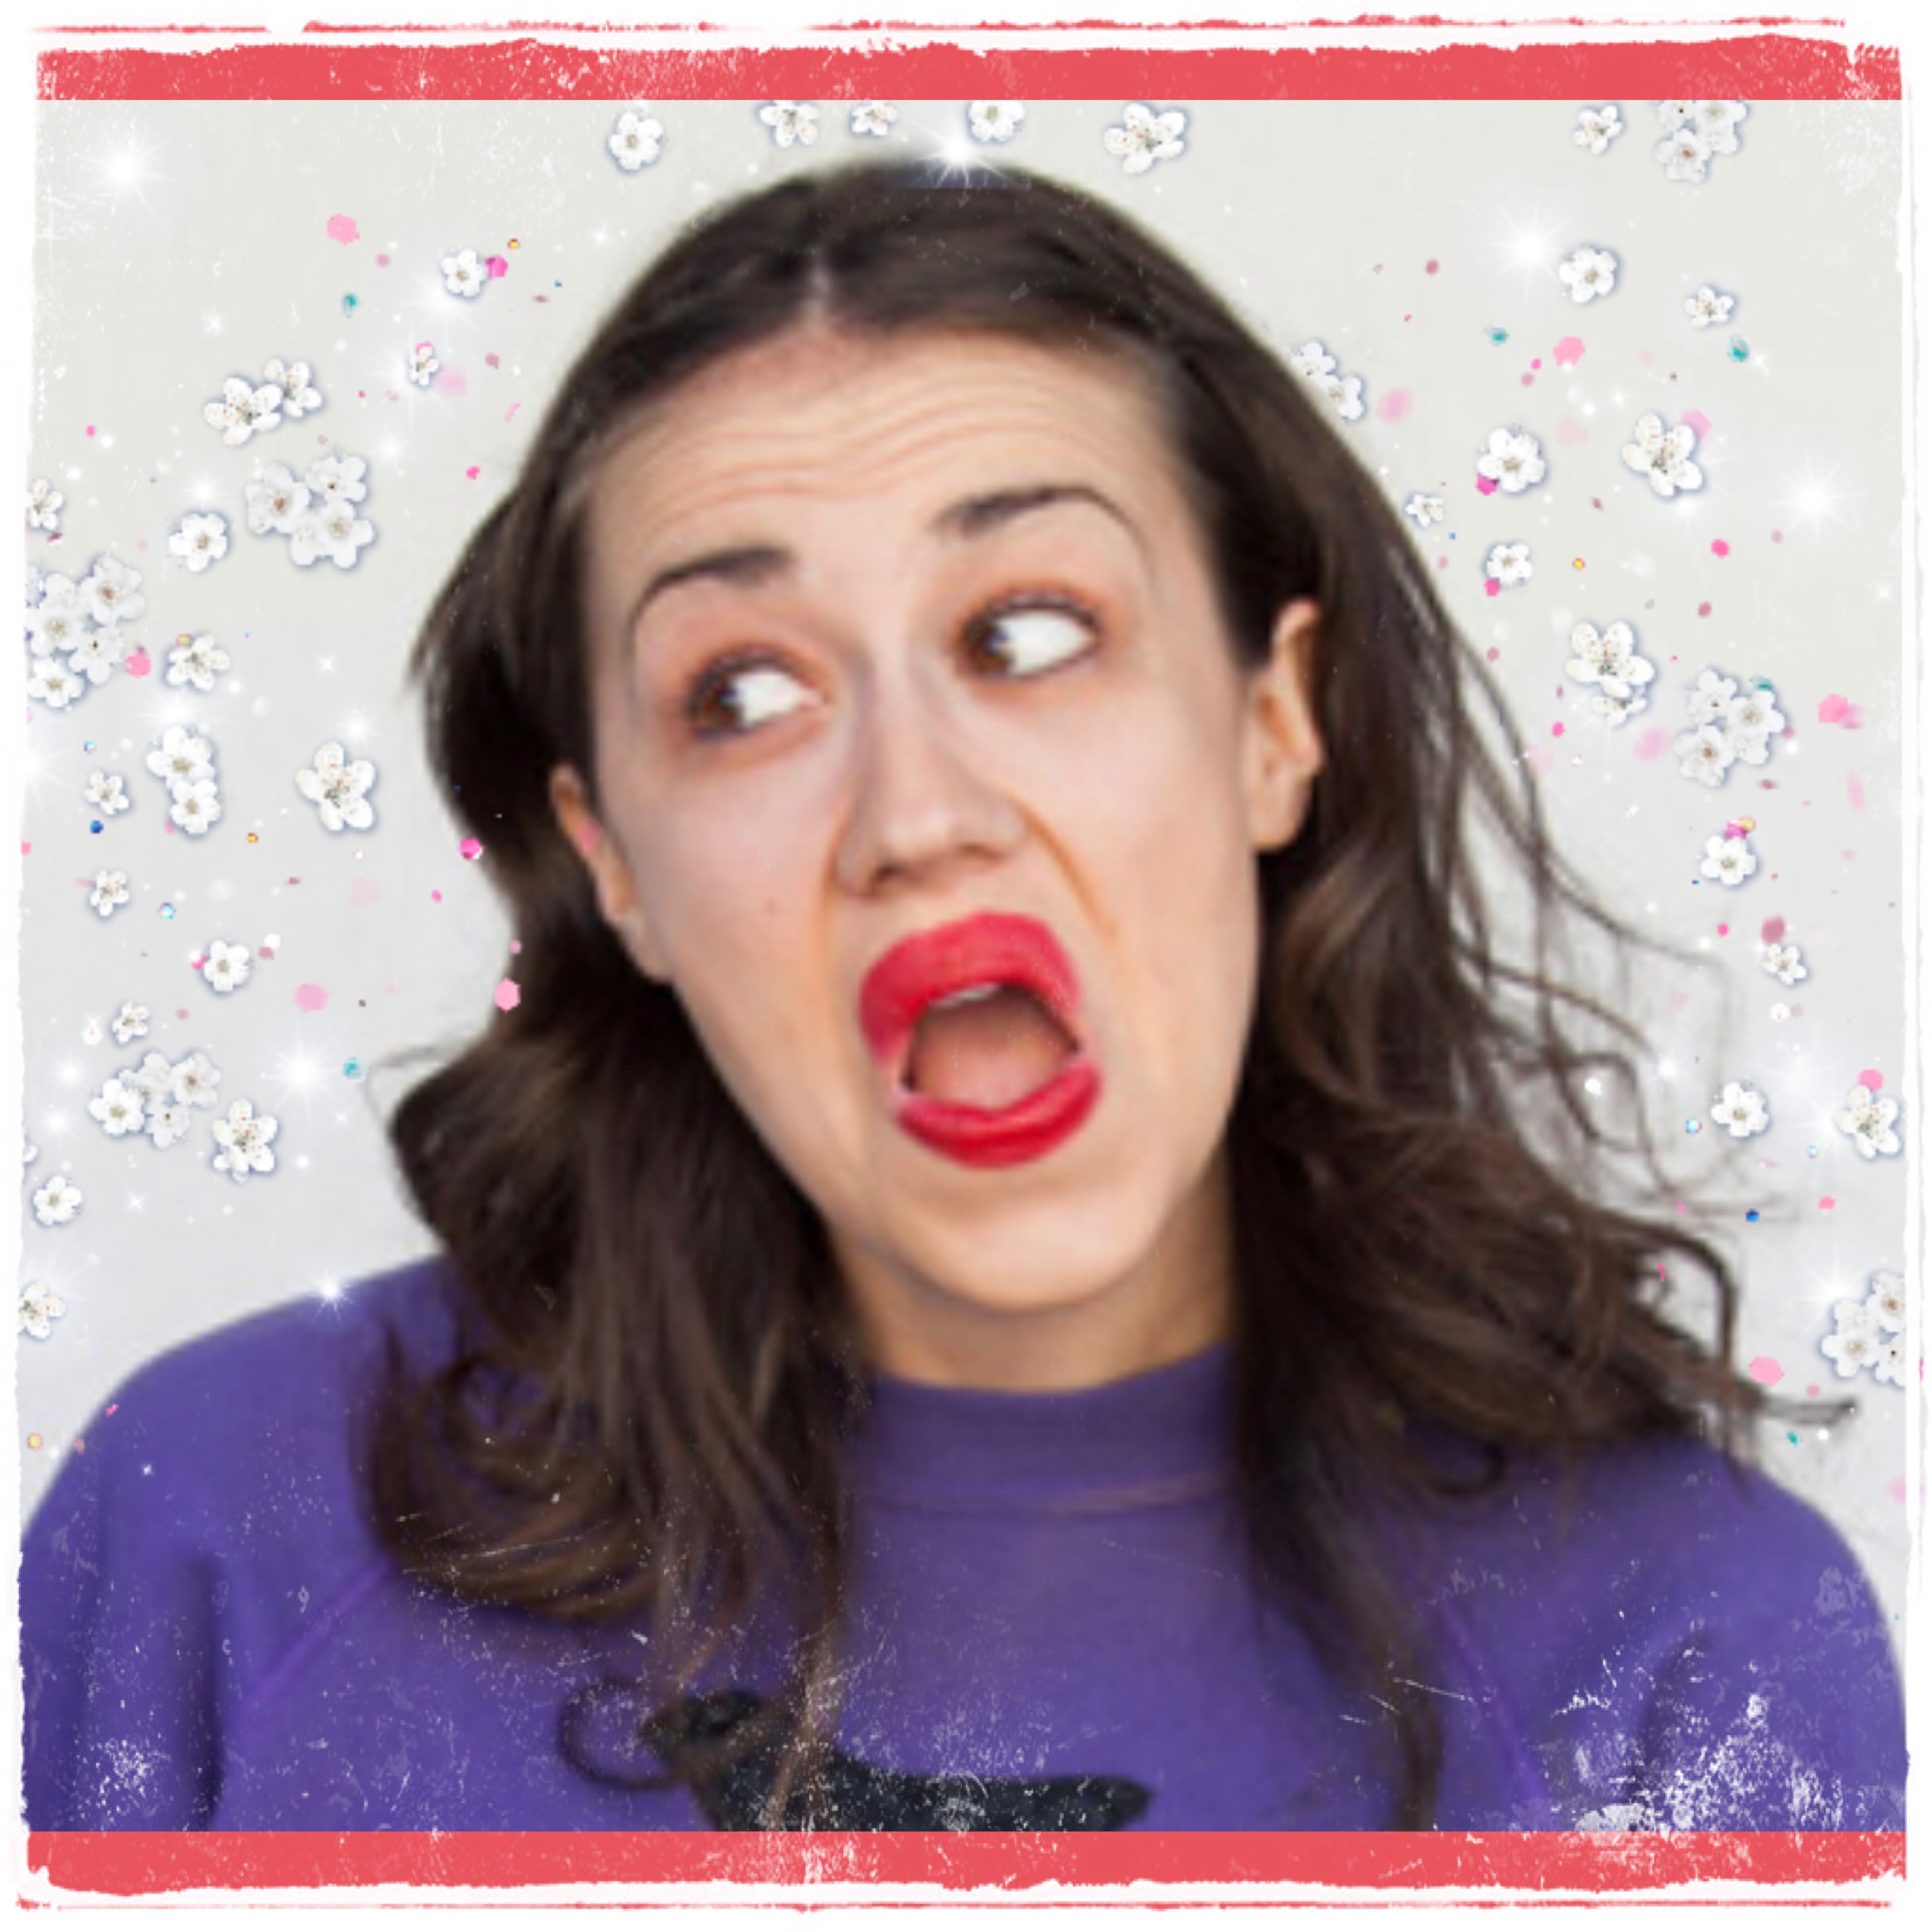 This visual is about freetoedit mirandasings #freetoedit #mirandasings.